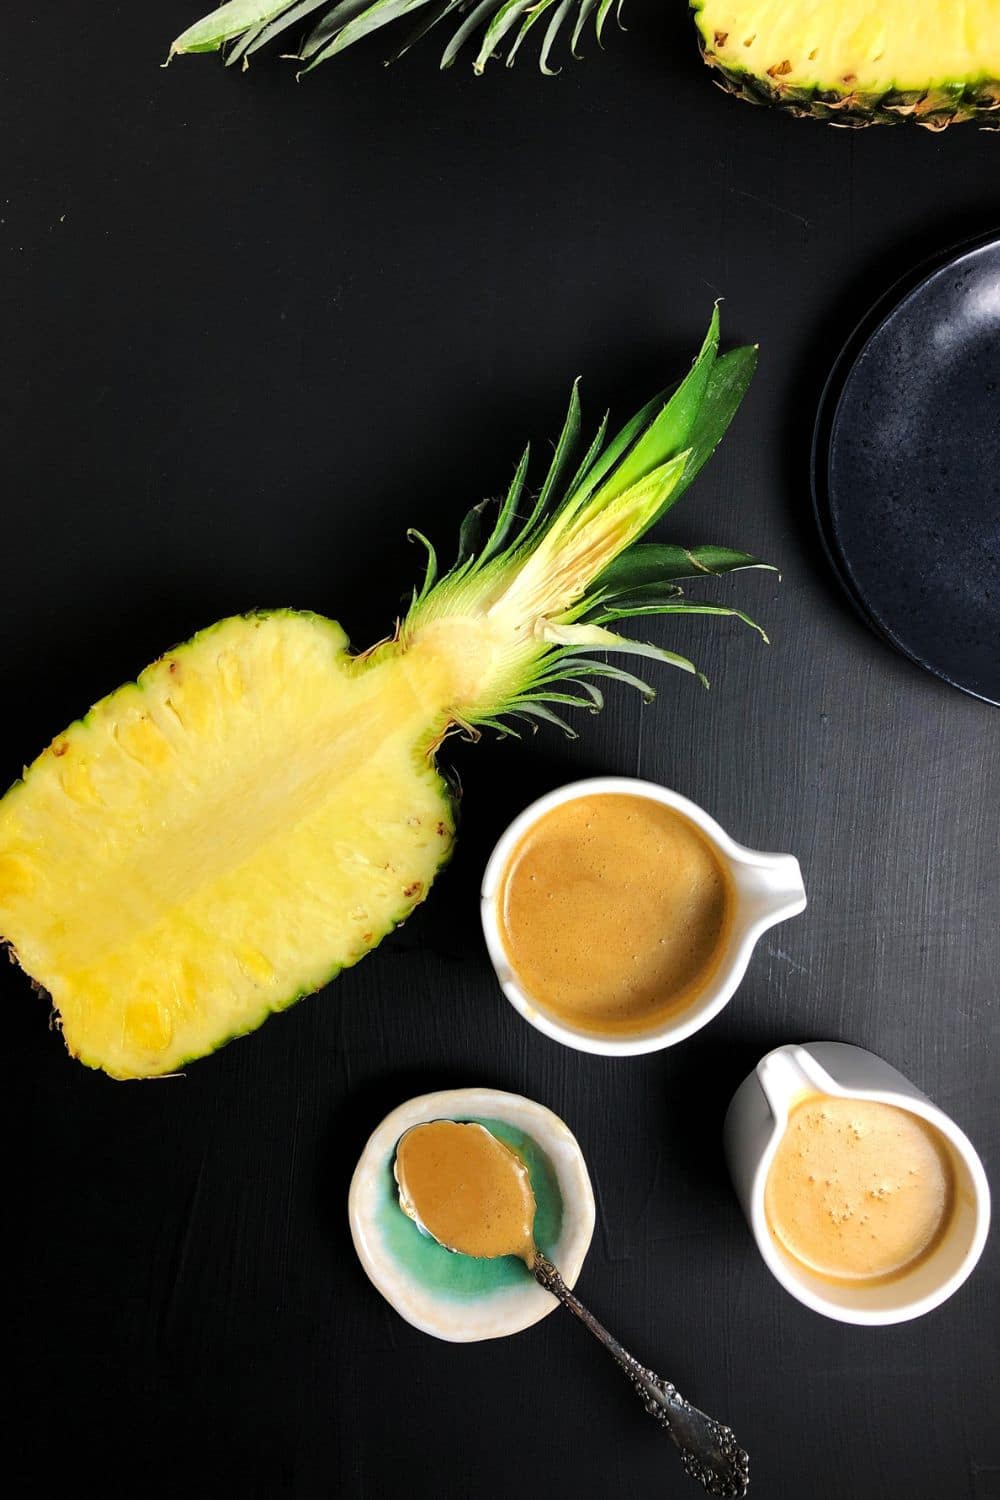 Top down view of two white vessels of Pineapple Brown Butter Teriyaki Sauce, alongside a spoon with some sauce, orange slices, and a halved pineapple, all against a black background.